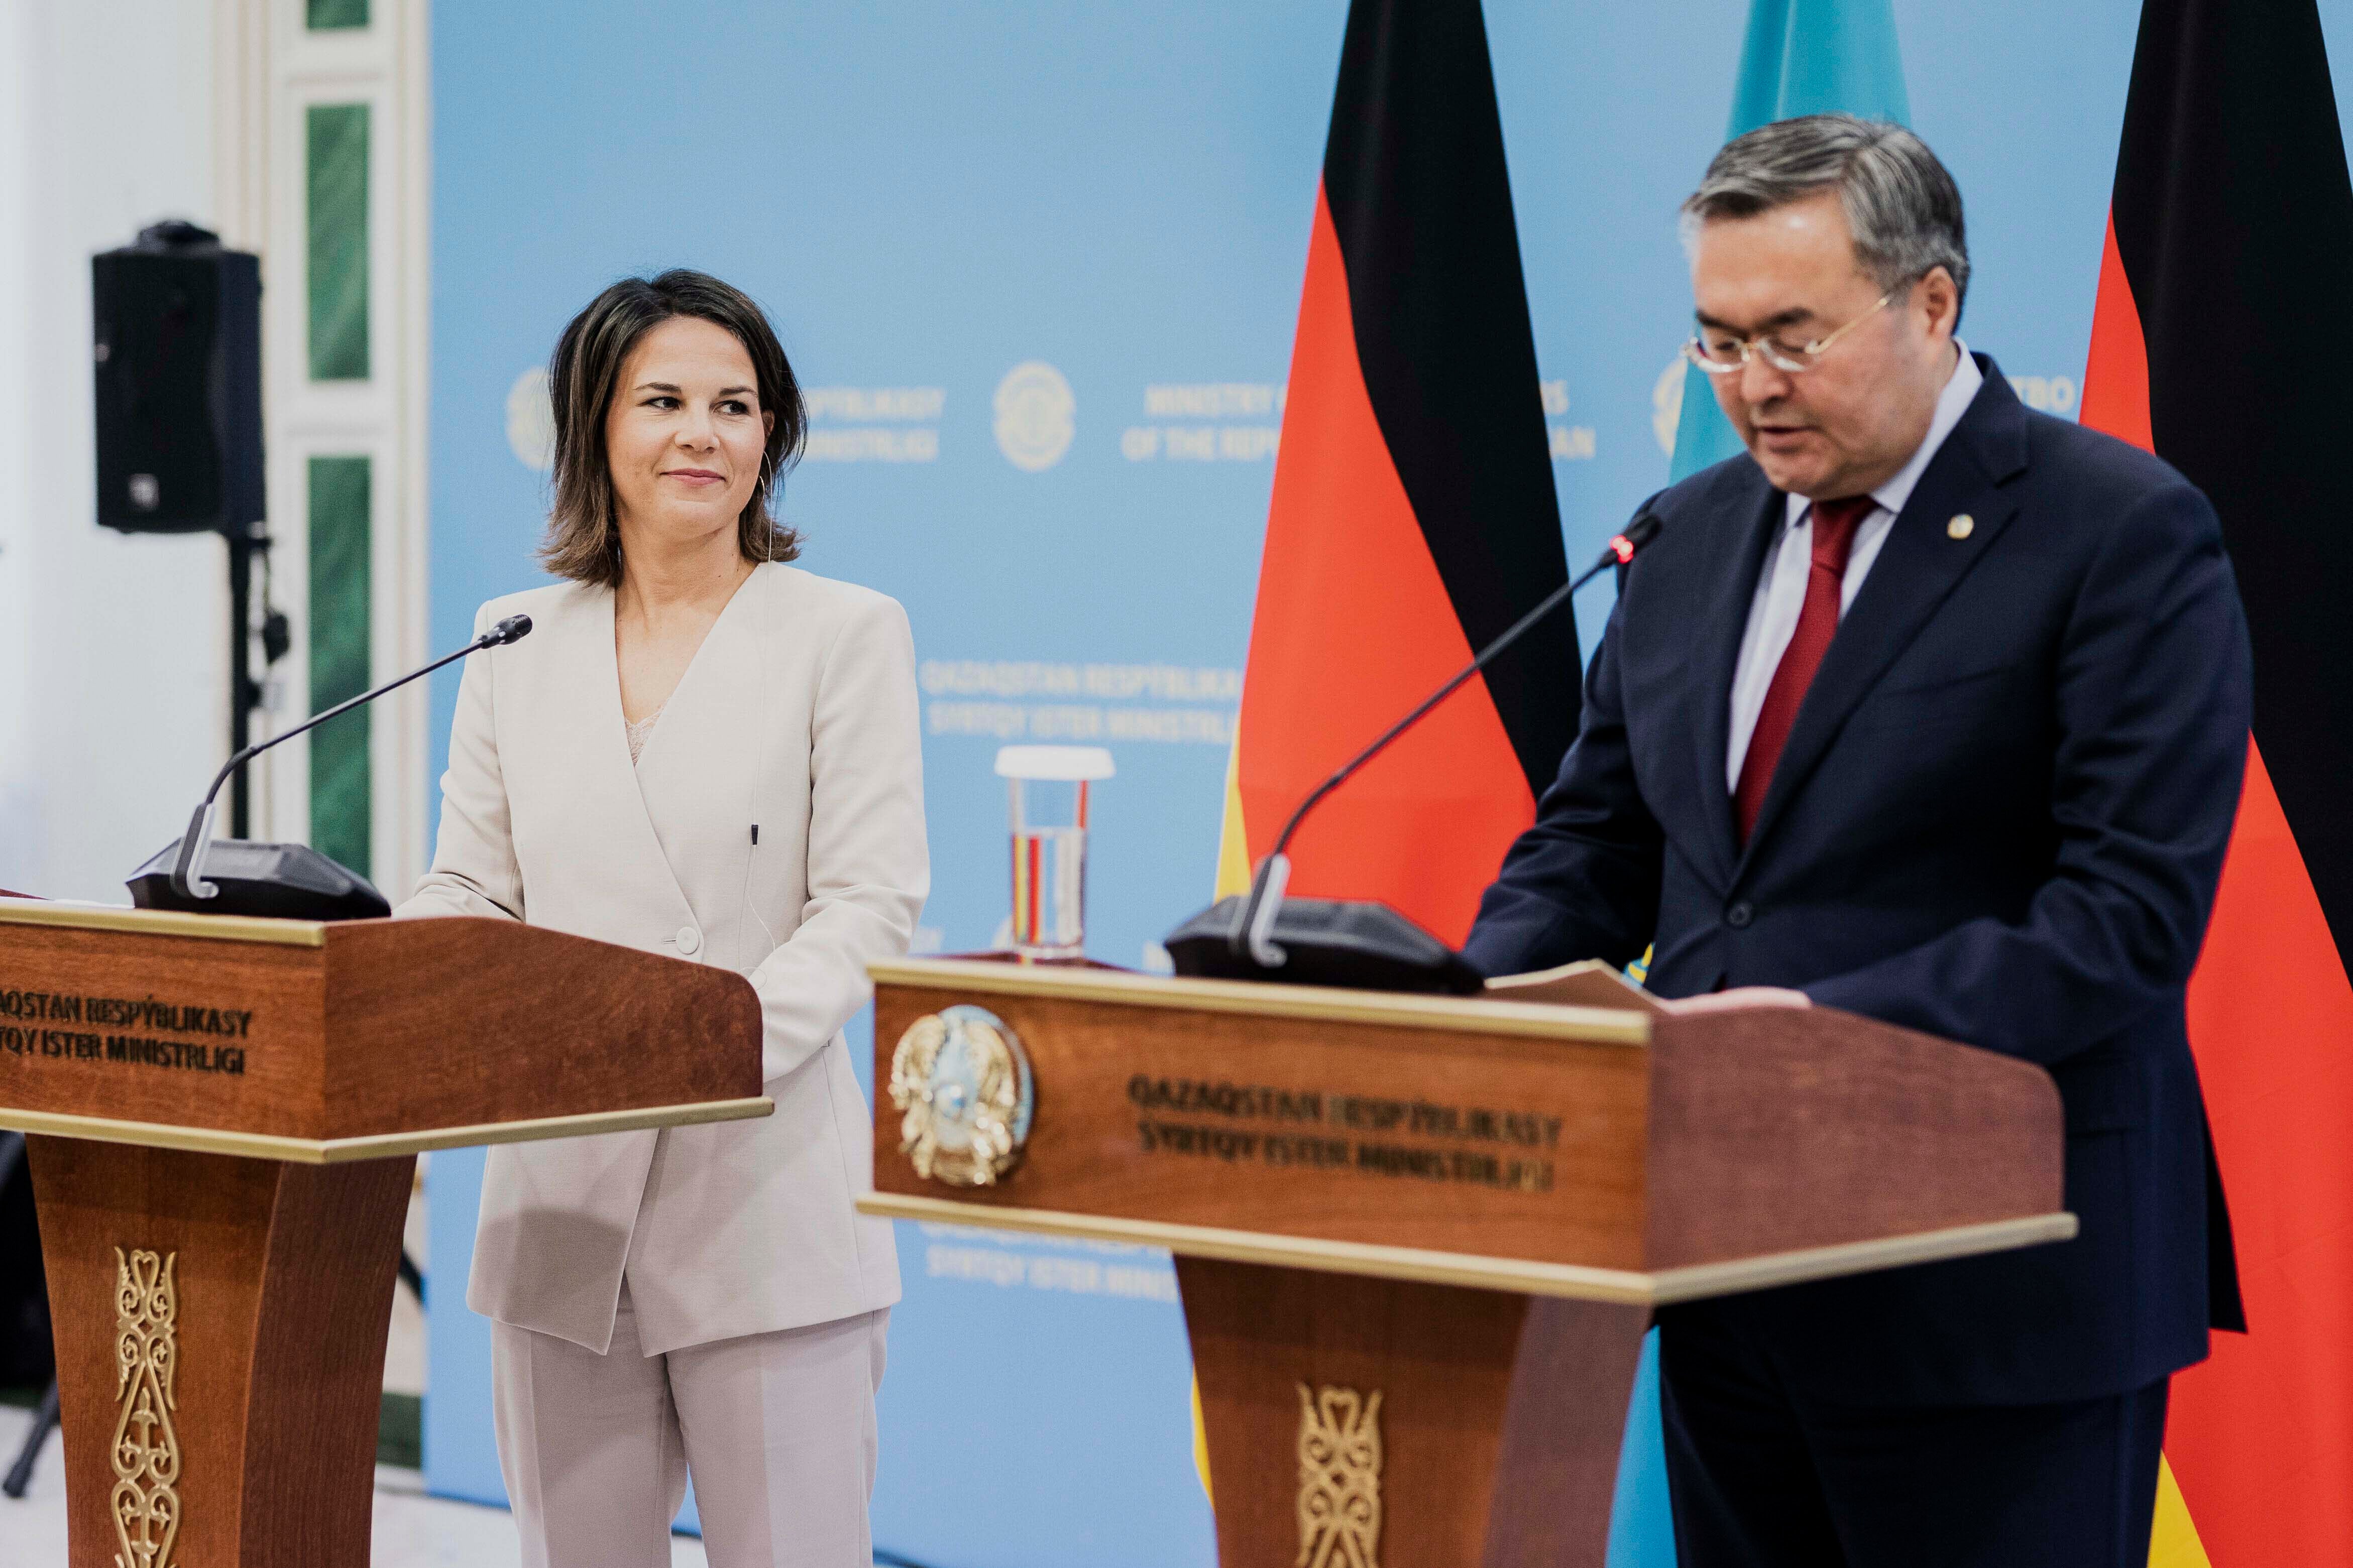 Annalena Baerbock (left), Federal Foreign Minister, and Muchtar Tleuberdi, Foreign Minister of Kazakhstan, during a press conference in Astana, October 31, 2022.